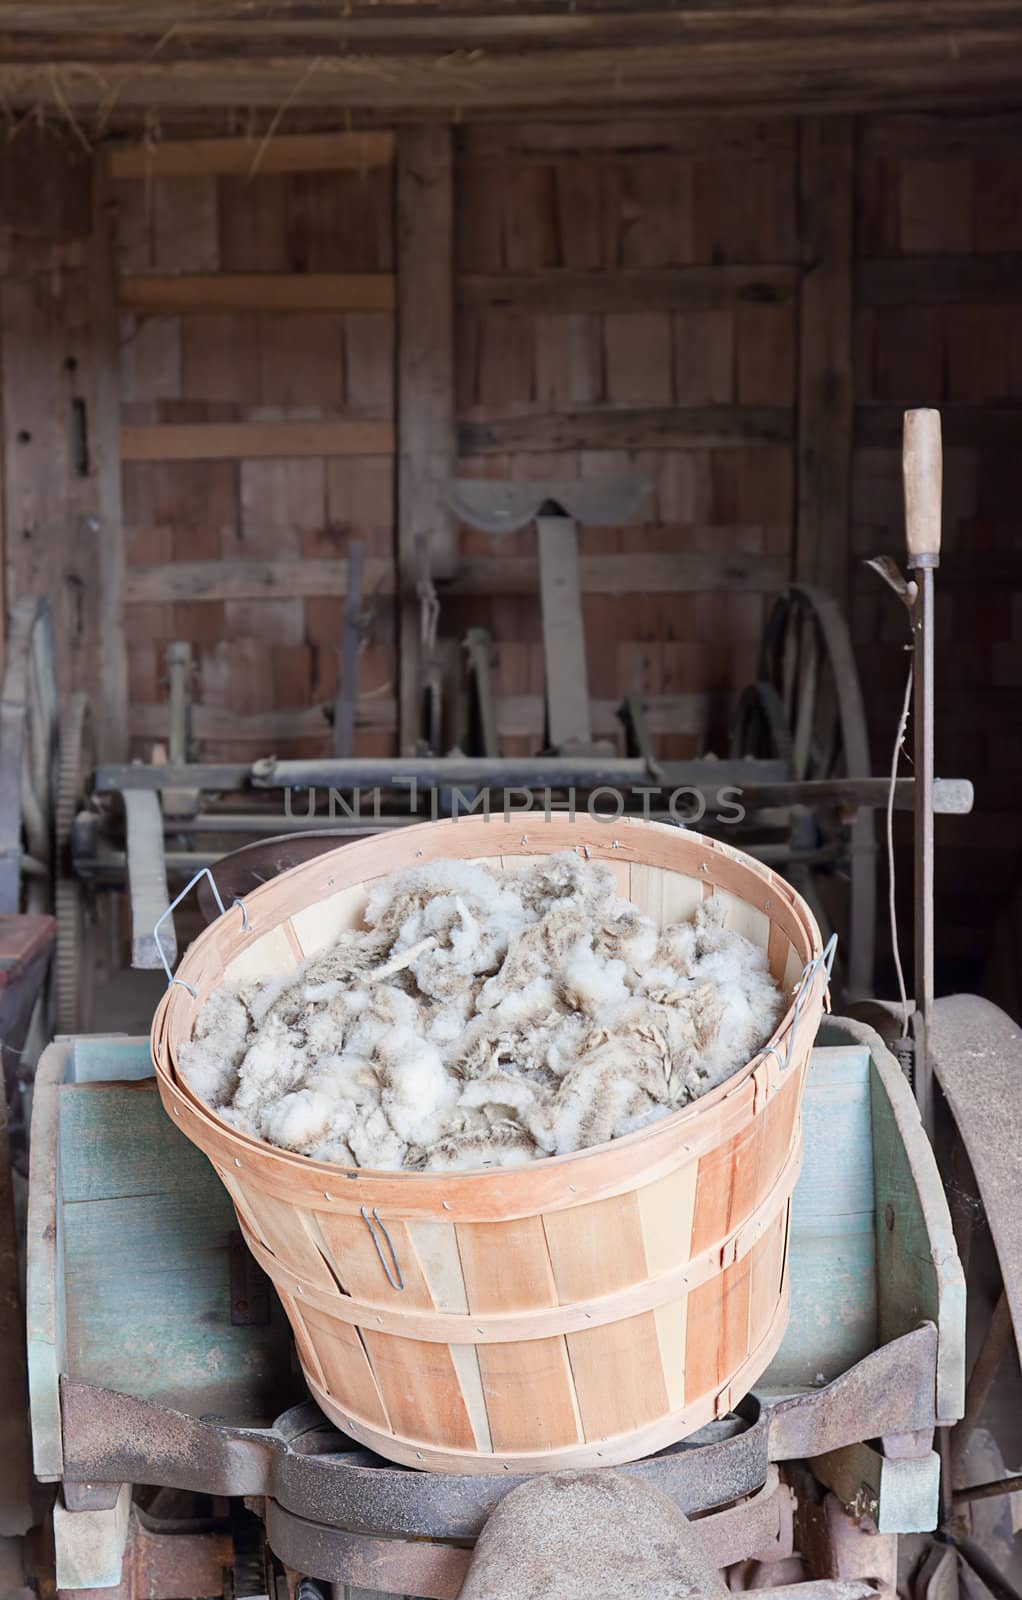 A basket of wool just sheared from the sheep. This is known as Greasy Wool" or "Wool in the Grease".